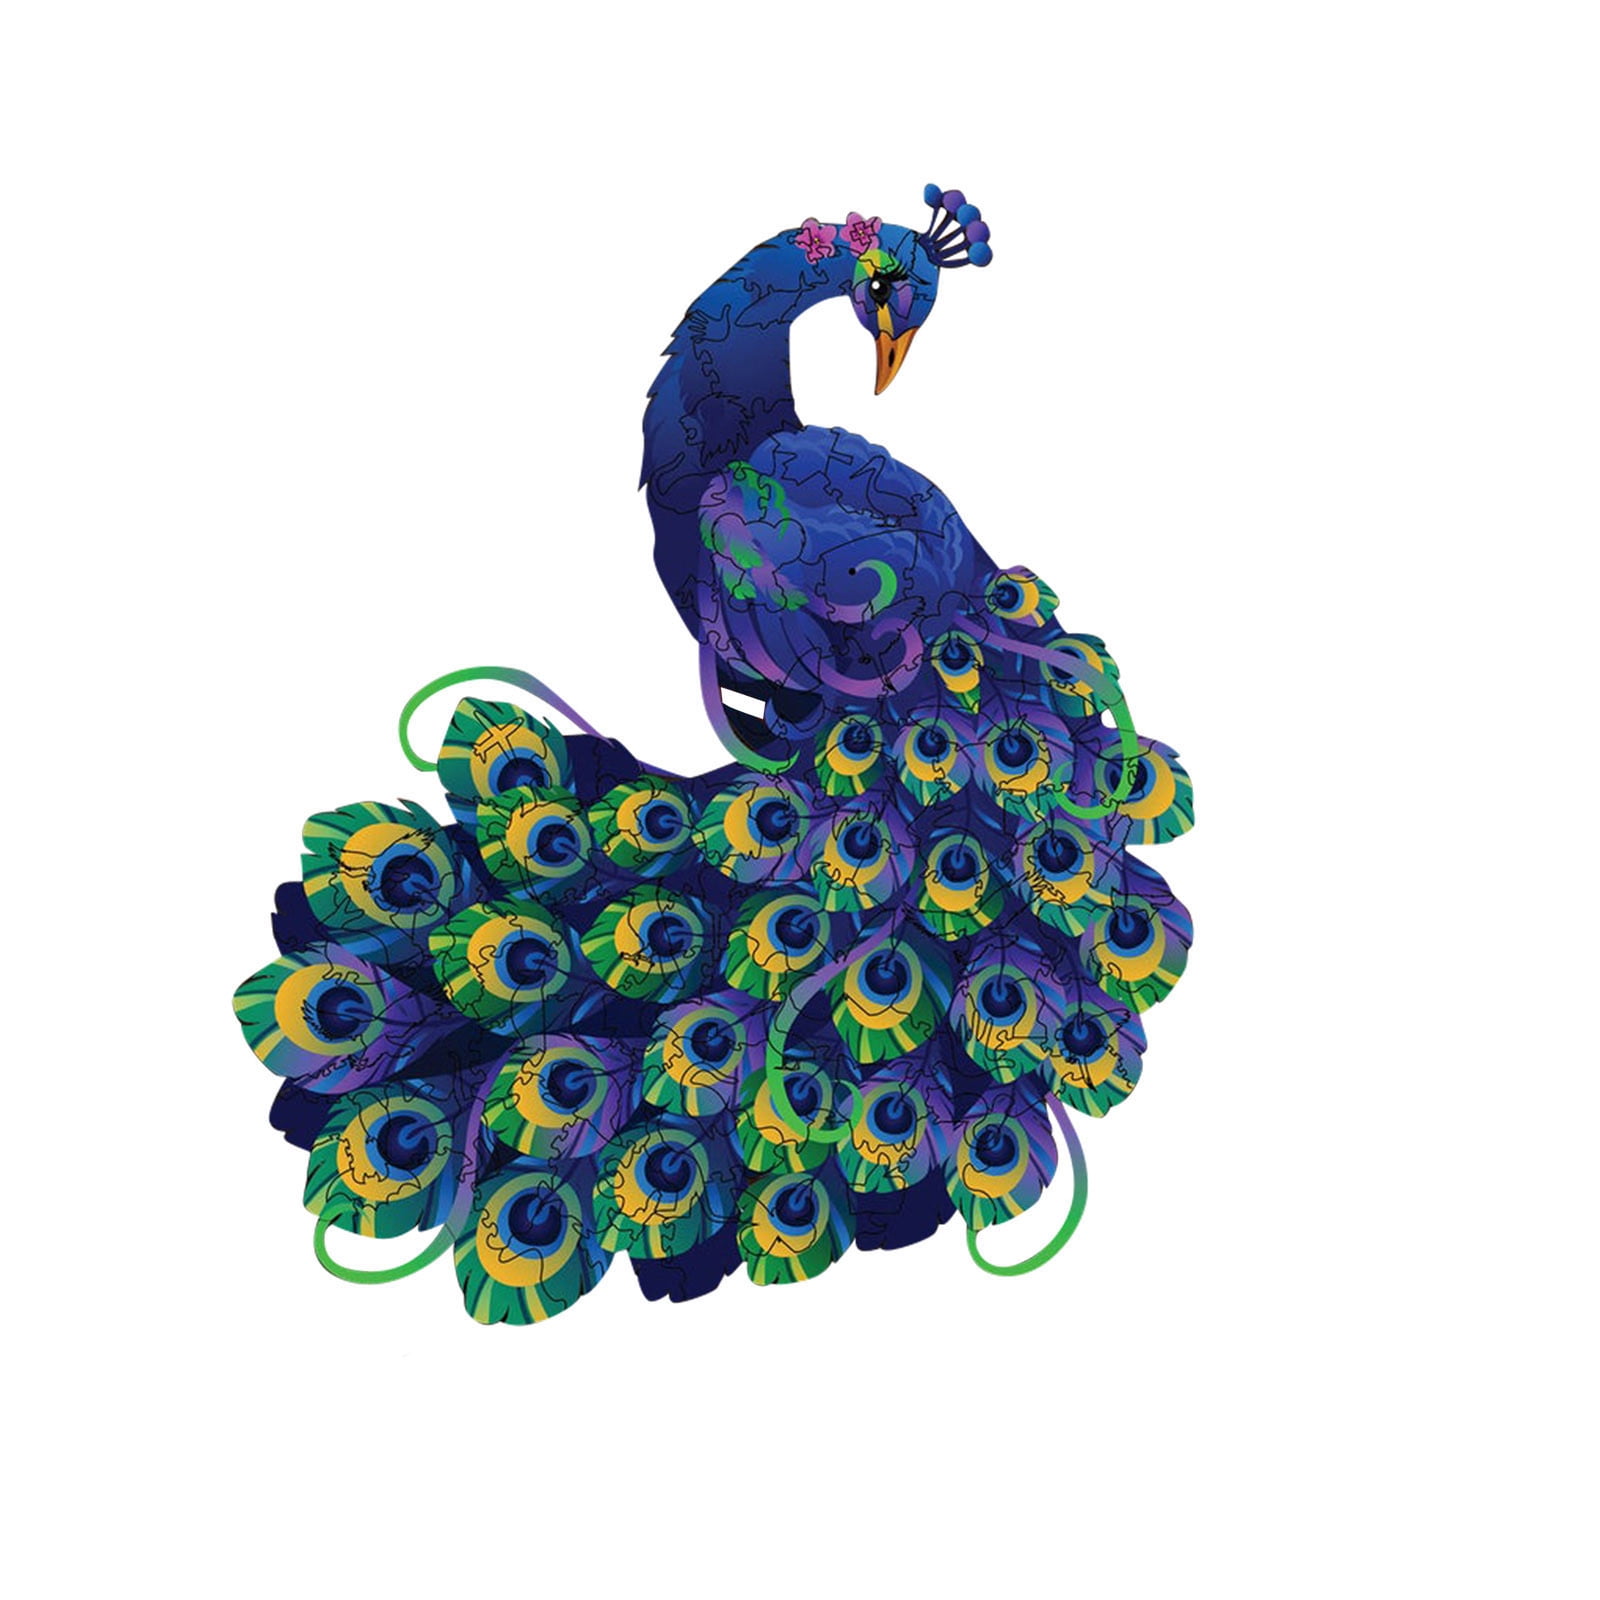 Blue Peacock Jigsaw Puzzles For Adult Kids Learning Education Toys 1000 pieces 